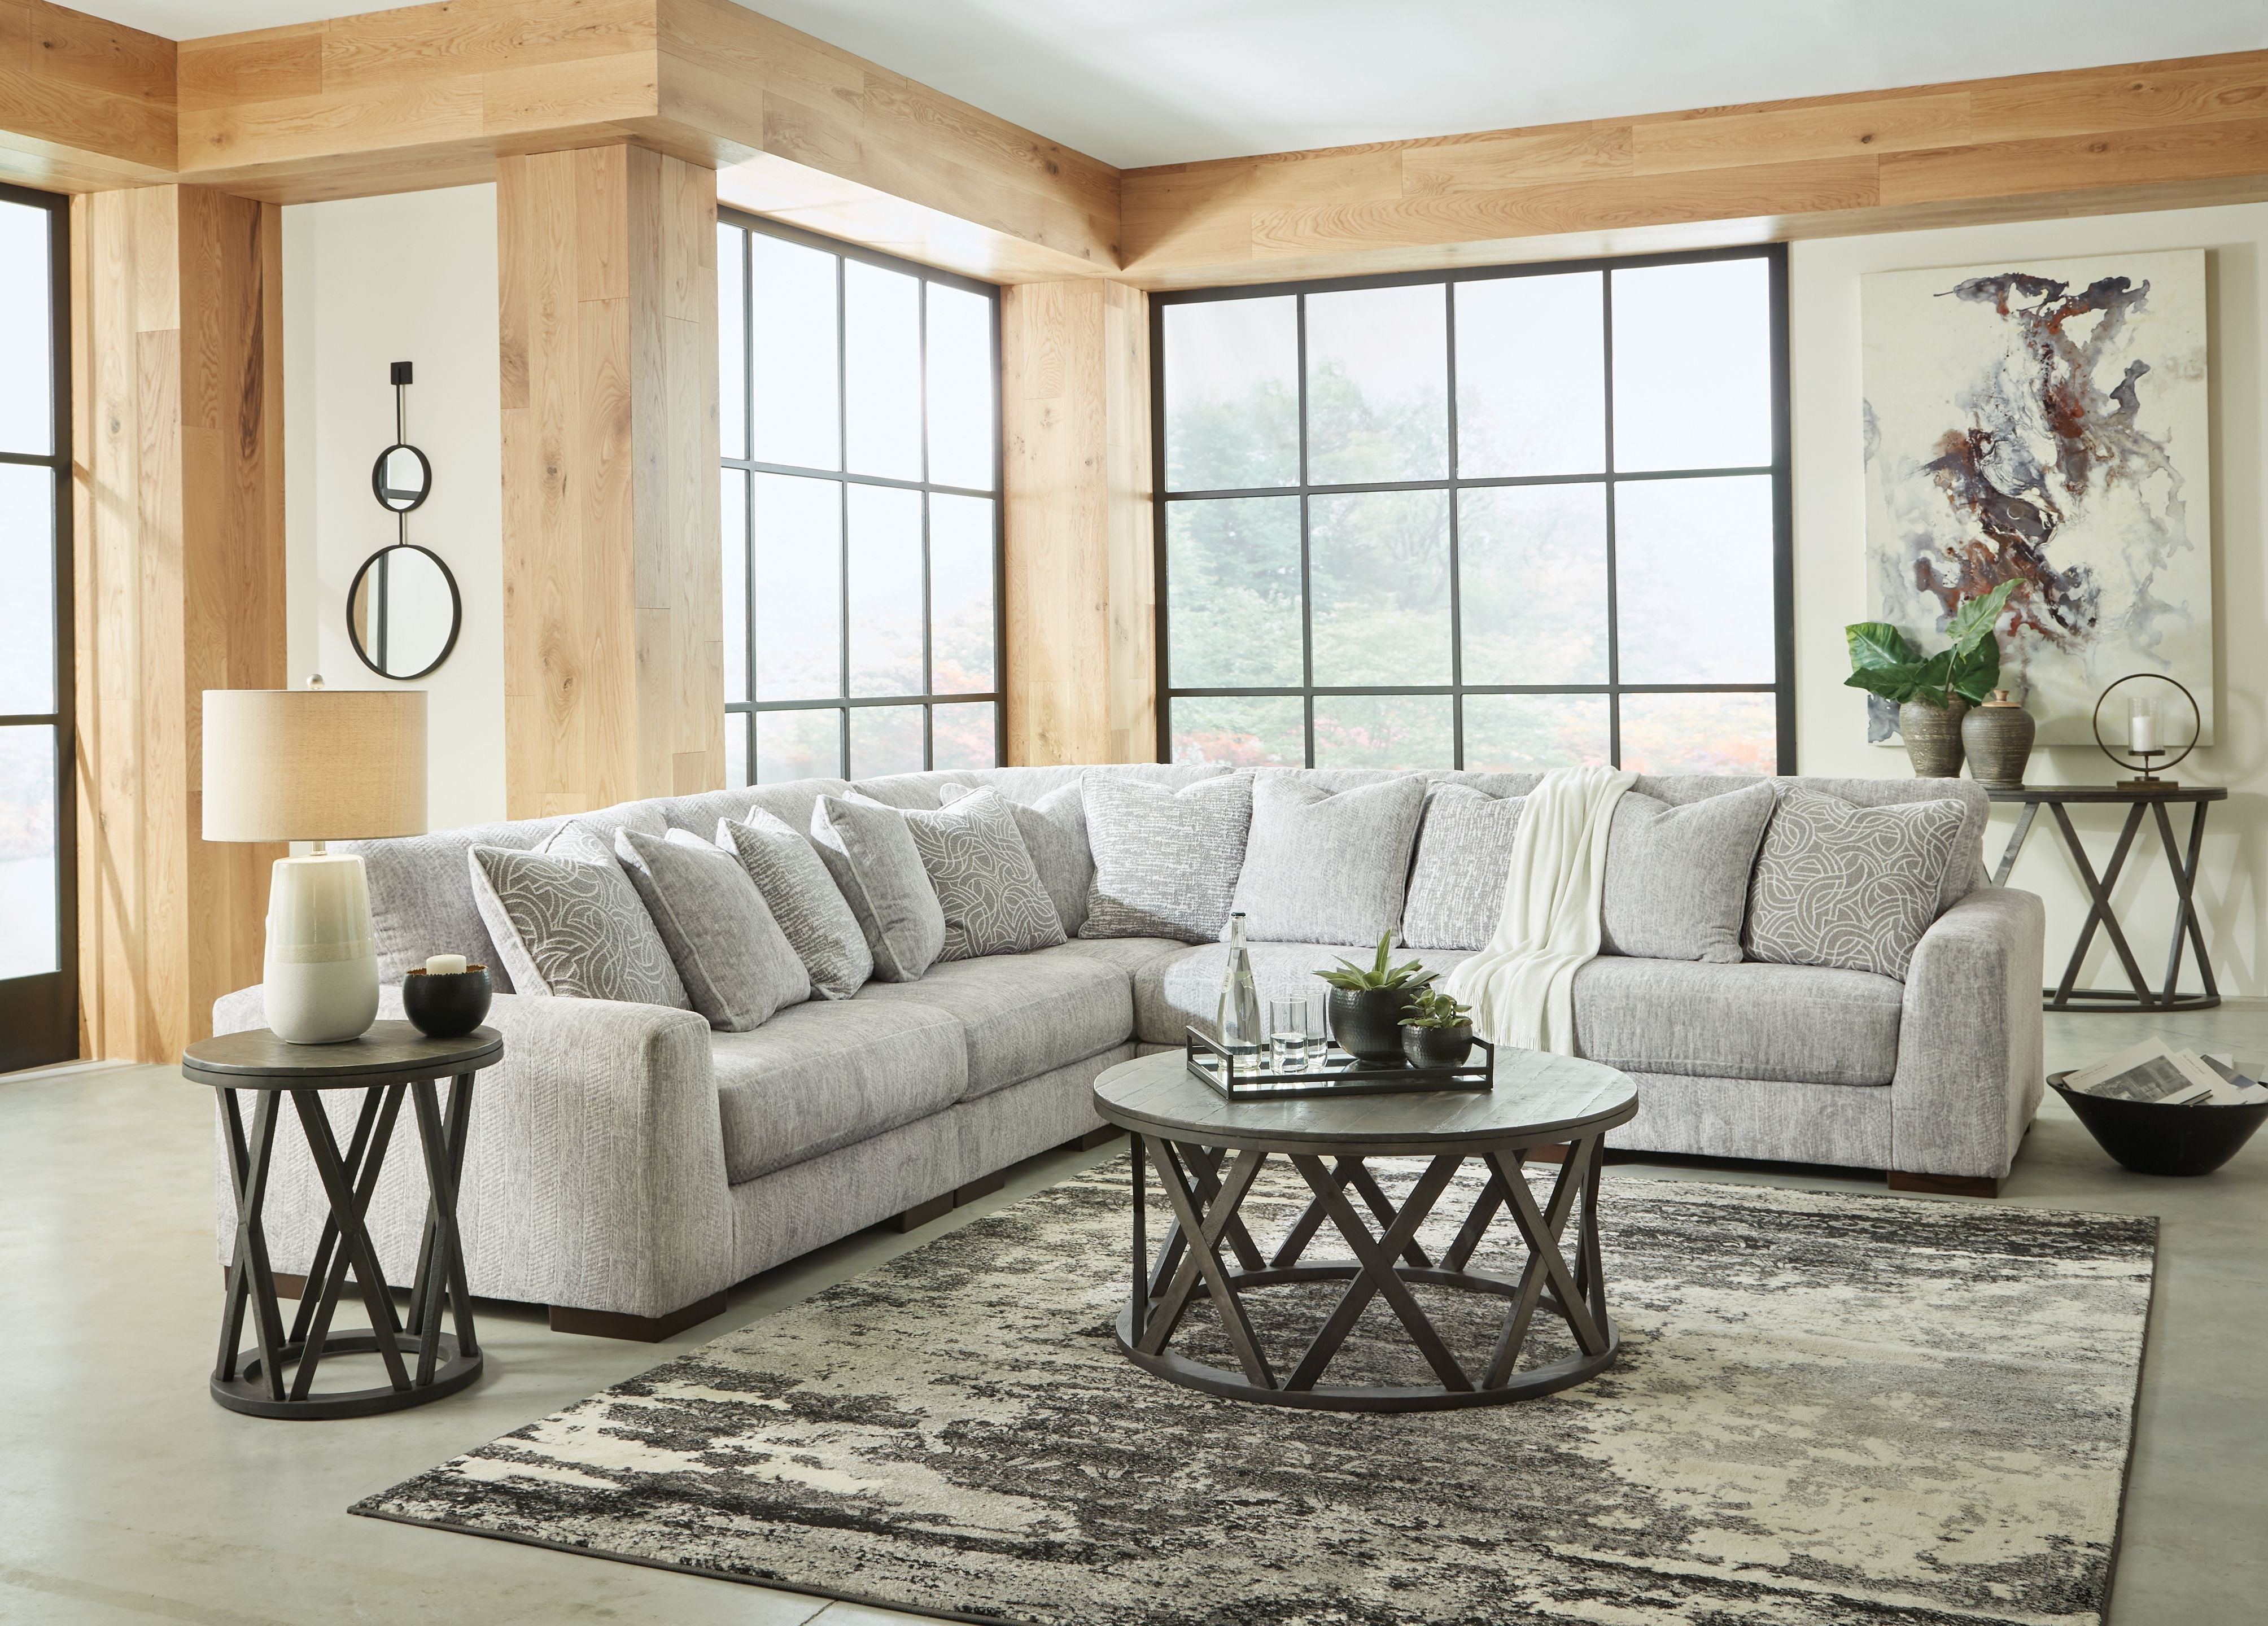 Regent Park Gray Modular Sectional - Plush Cushions Modern-Stationary Sectionals-American Furniture Outlet